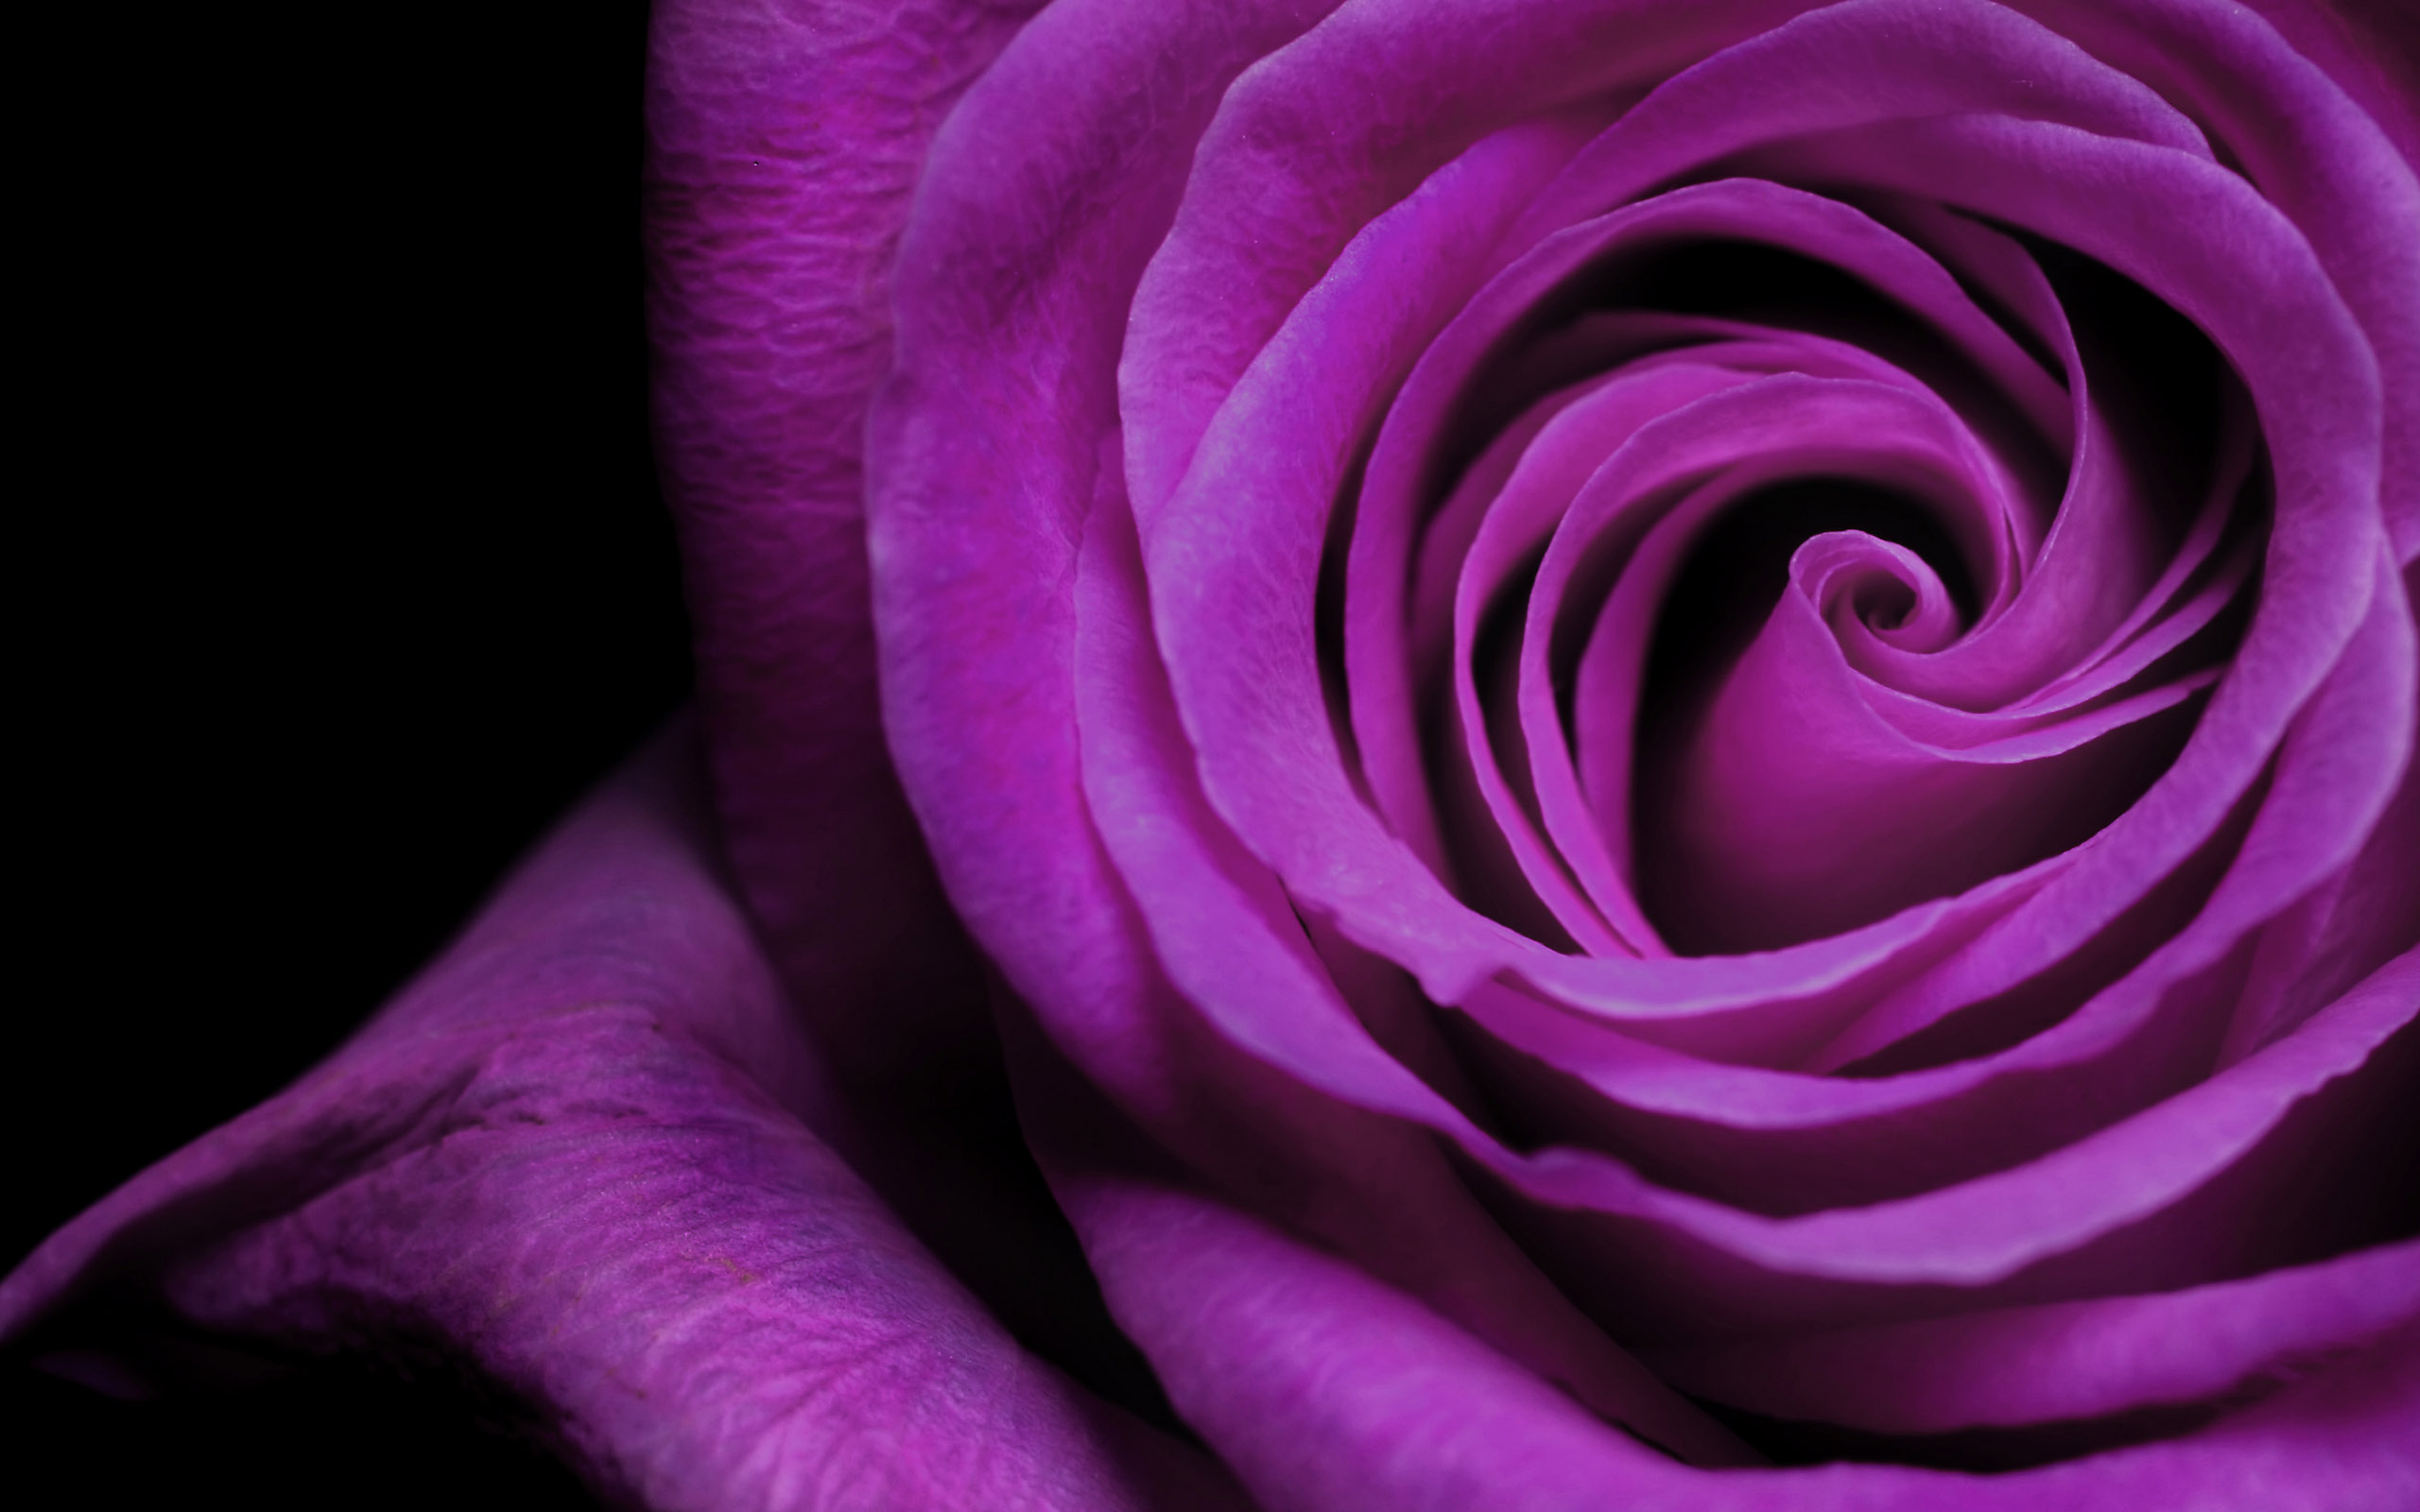 Rose Flower Wallpaper Is A Great For Your Puter